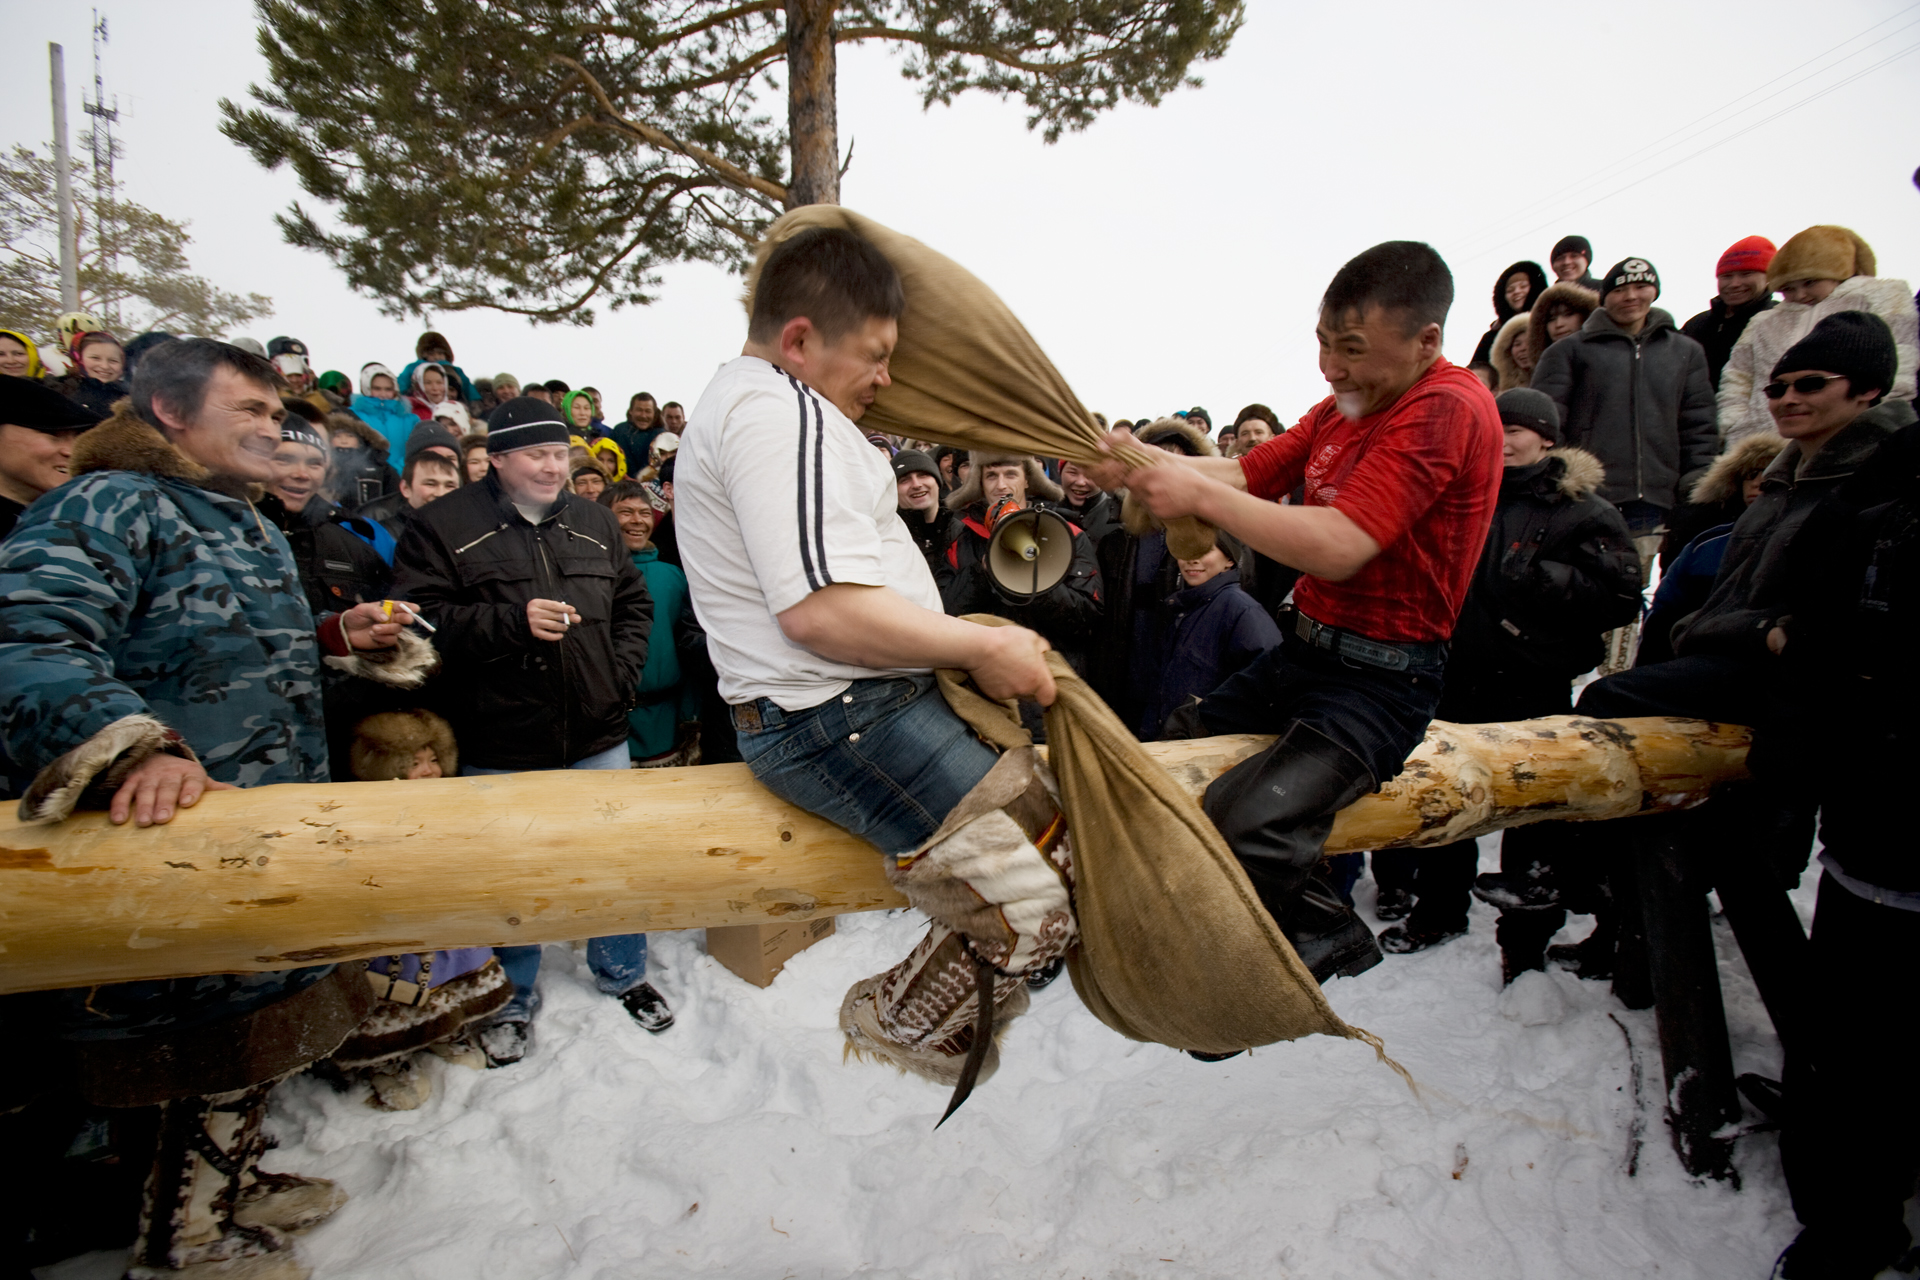  Traditional events and competitions during the Khanty-Mansiysk region’s annual “Fishing and Hunting Day” include the popular fight-on-a-log.  Russkinskaya, Russia  